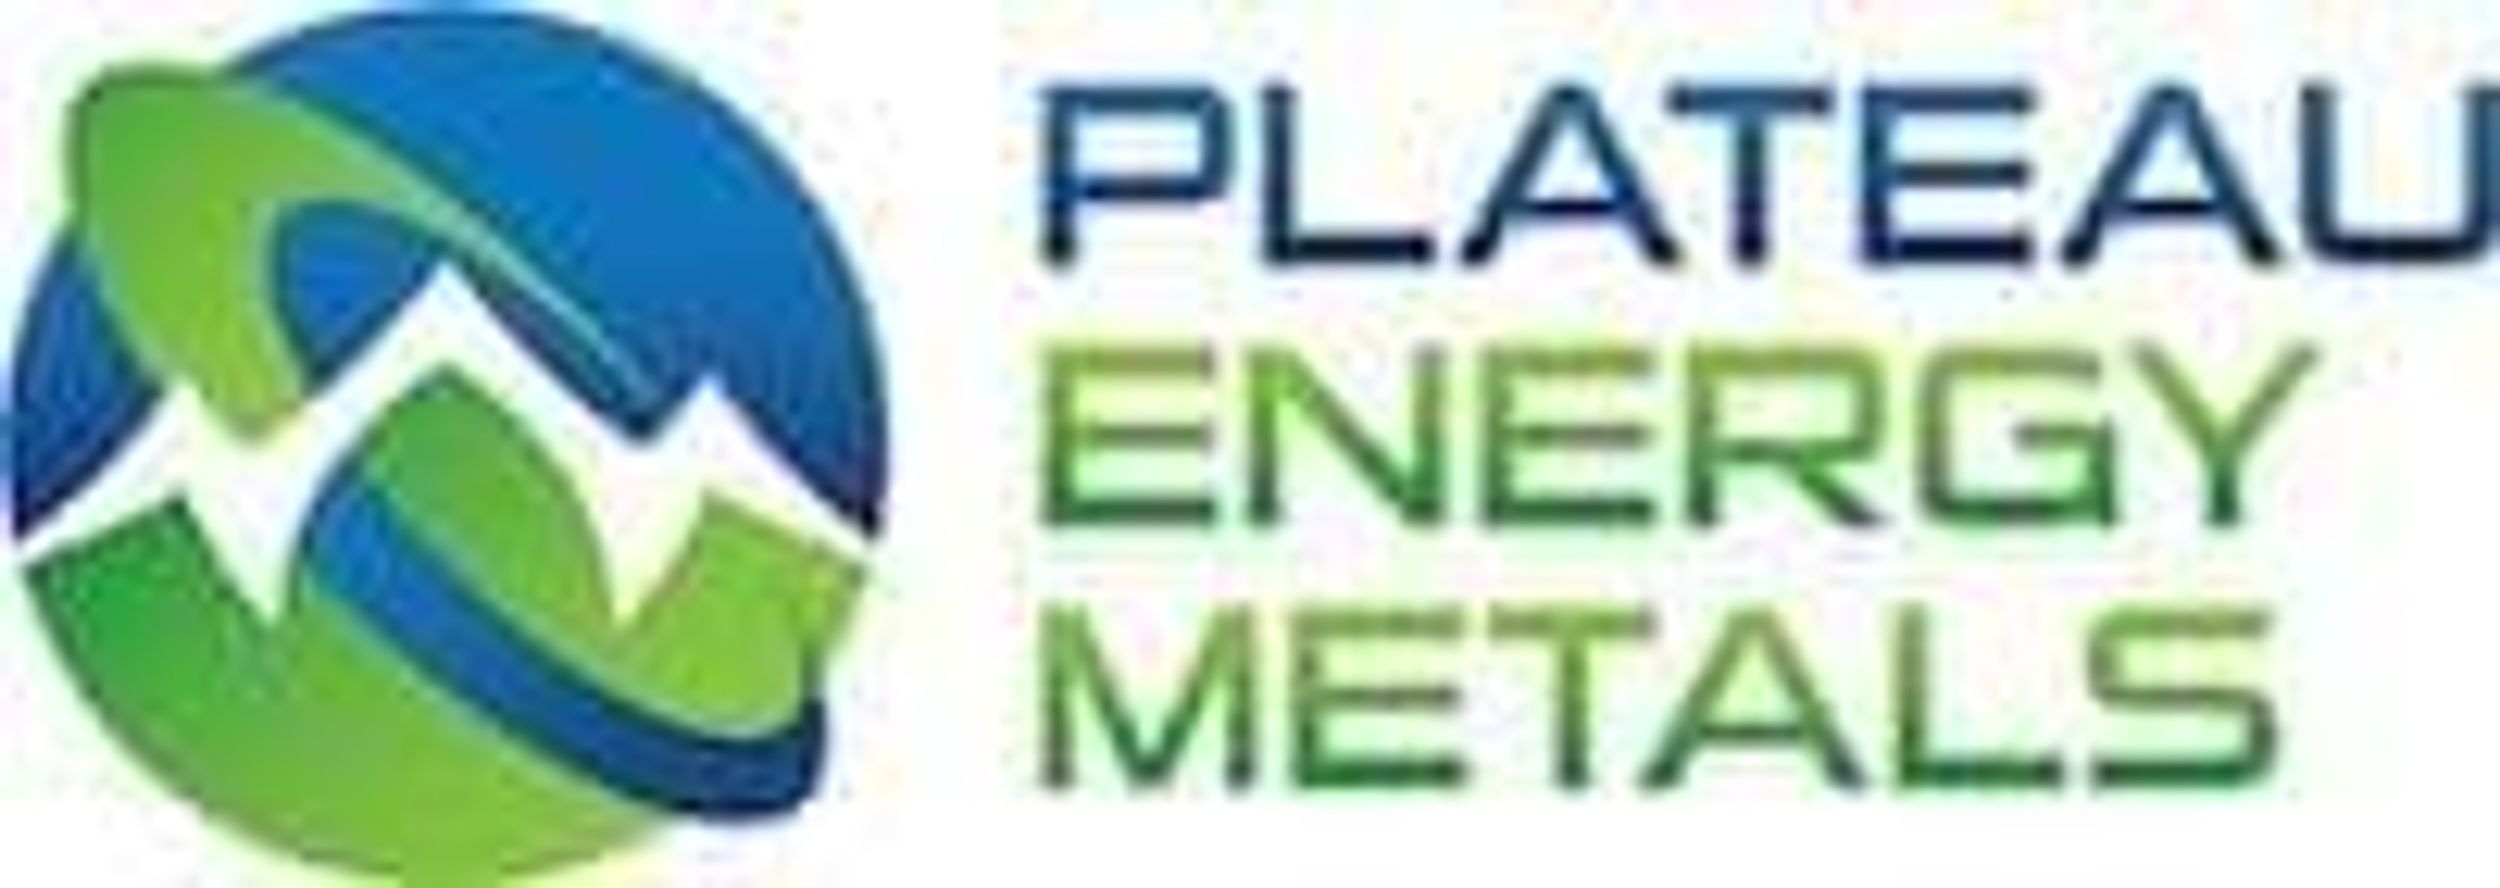 Plateau Energy Metals Announces Final Results From Its Preliminary Test Work Program At ANSTO Minerals Laboratories, Australia. Battery Grade Lithium Carbonate Produced As Final Product From PLU’s Falchani Li Feed Material. PLU Now Plans To Progress Into A PEA